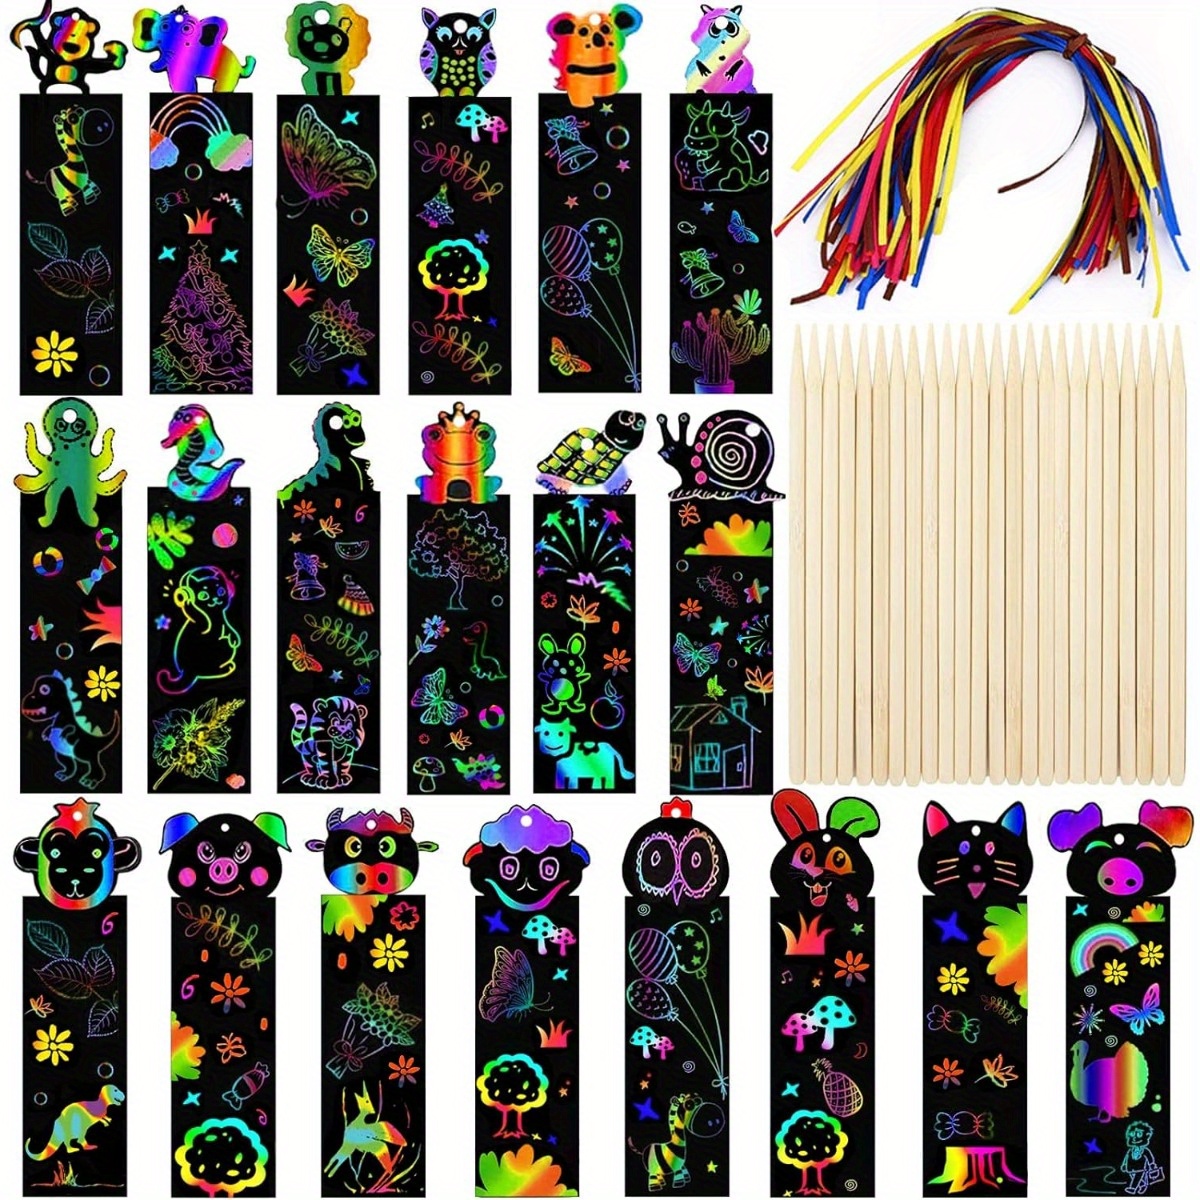 

48pcs Scratch Art, Magic Rainbow Bookmarks, Scratch Art Party Bag Fillers, Animal Craft Diy Scratch Paper Art Tags With Wooden Stylus And Ribbons For Birthday Gifts